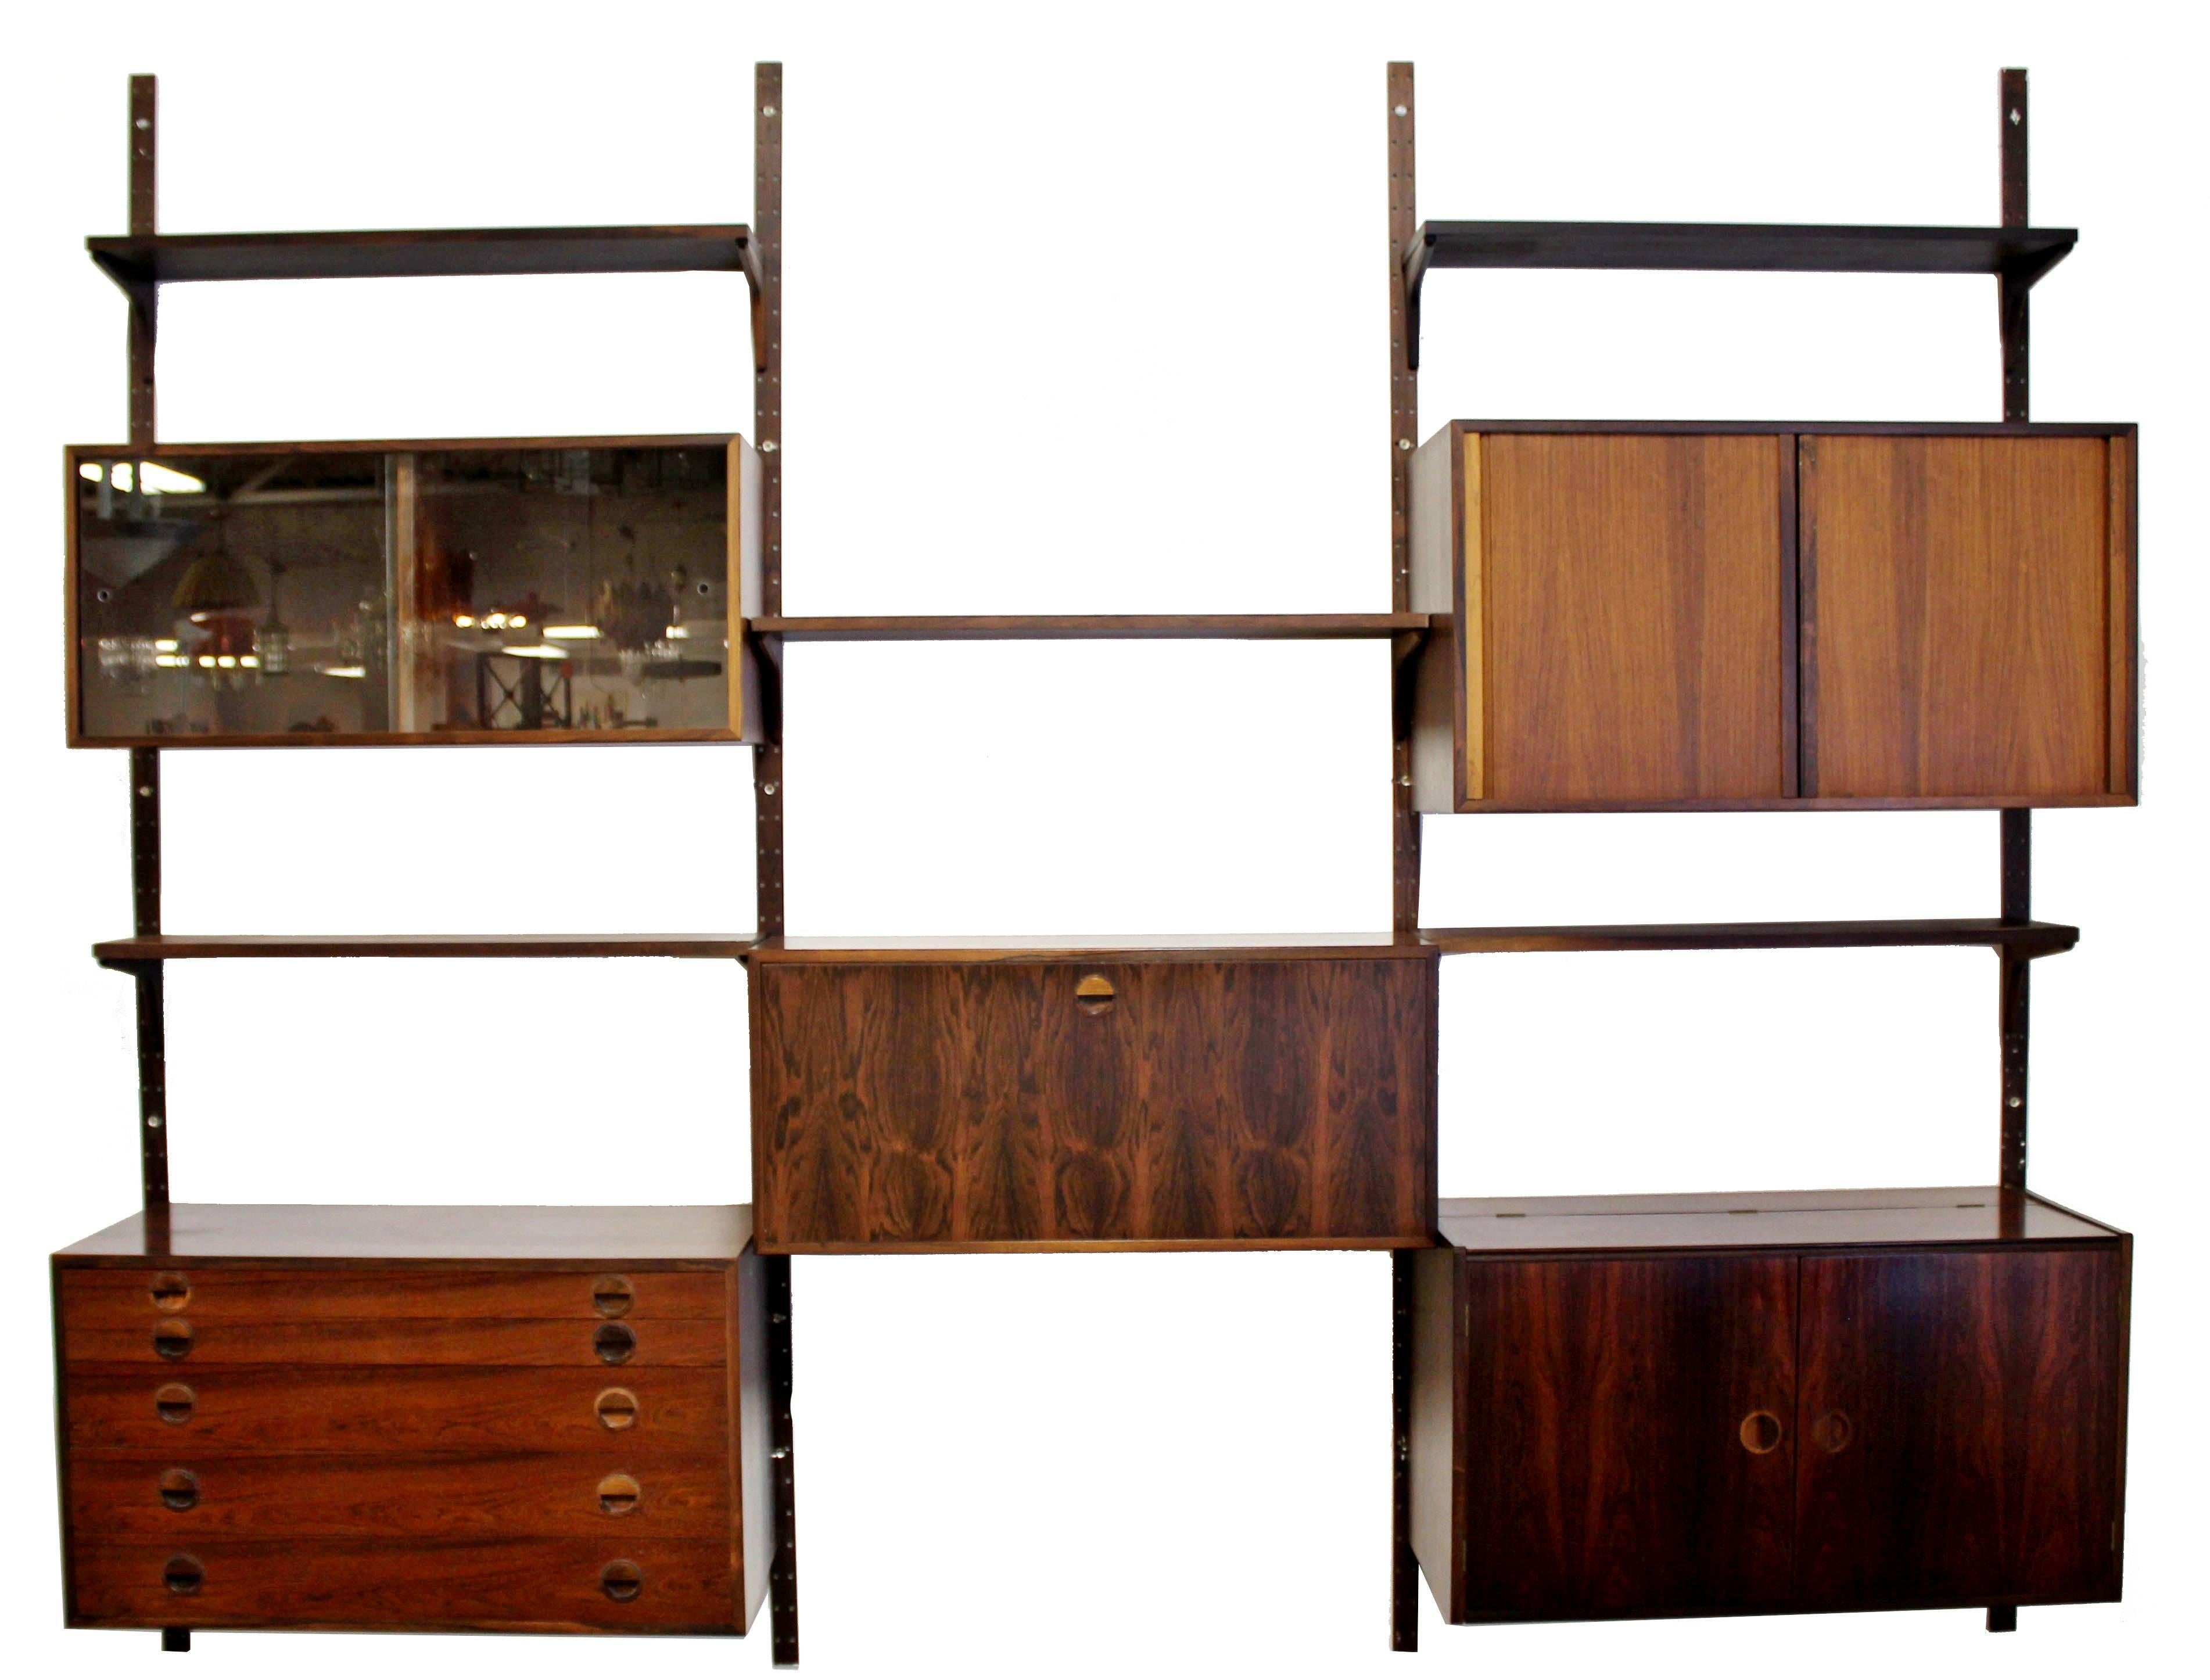 For your consideration is an utterly fabulous, rosewood, mounted wall shelving unit from Denmark, circa 1960s. Possibly attributed to Poul Cadovius. In excellent condition. The dimensions are 107